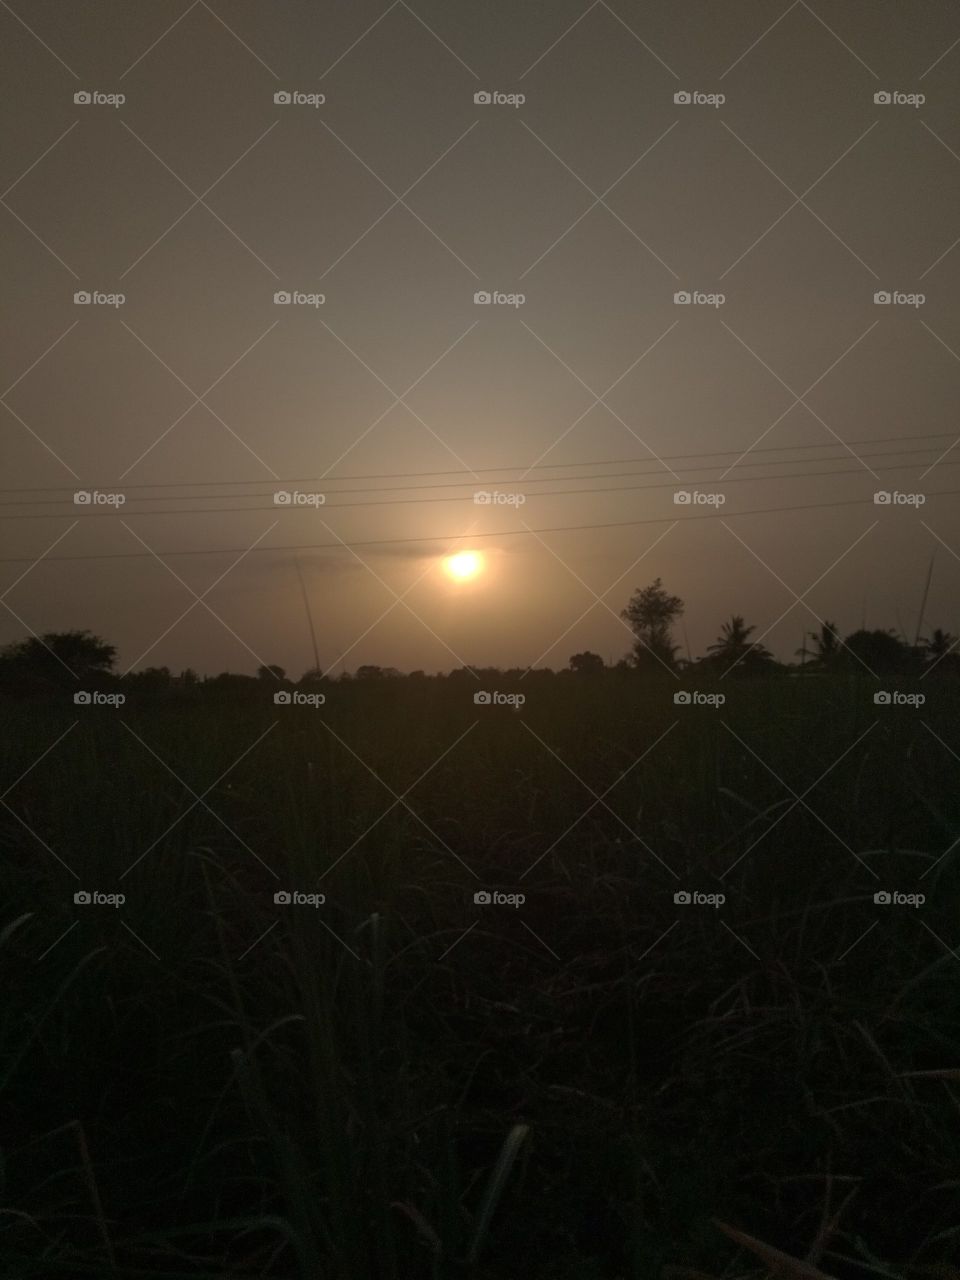 photo taken while ⛅ sunset......
At my own farm...
beautiful location..